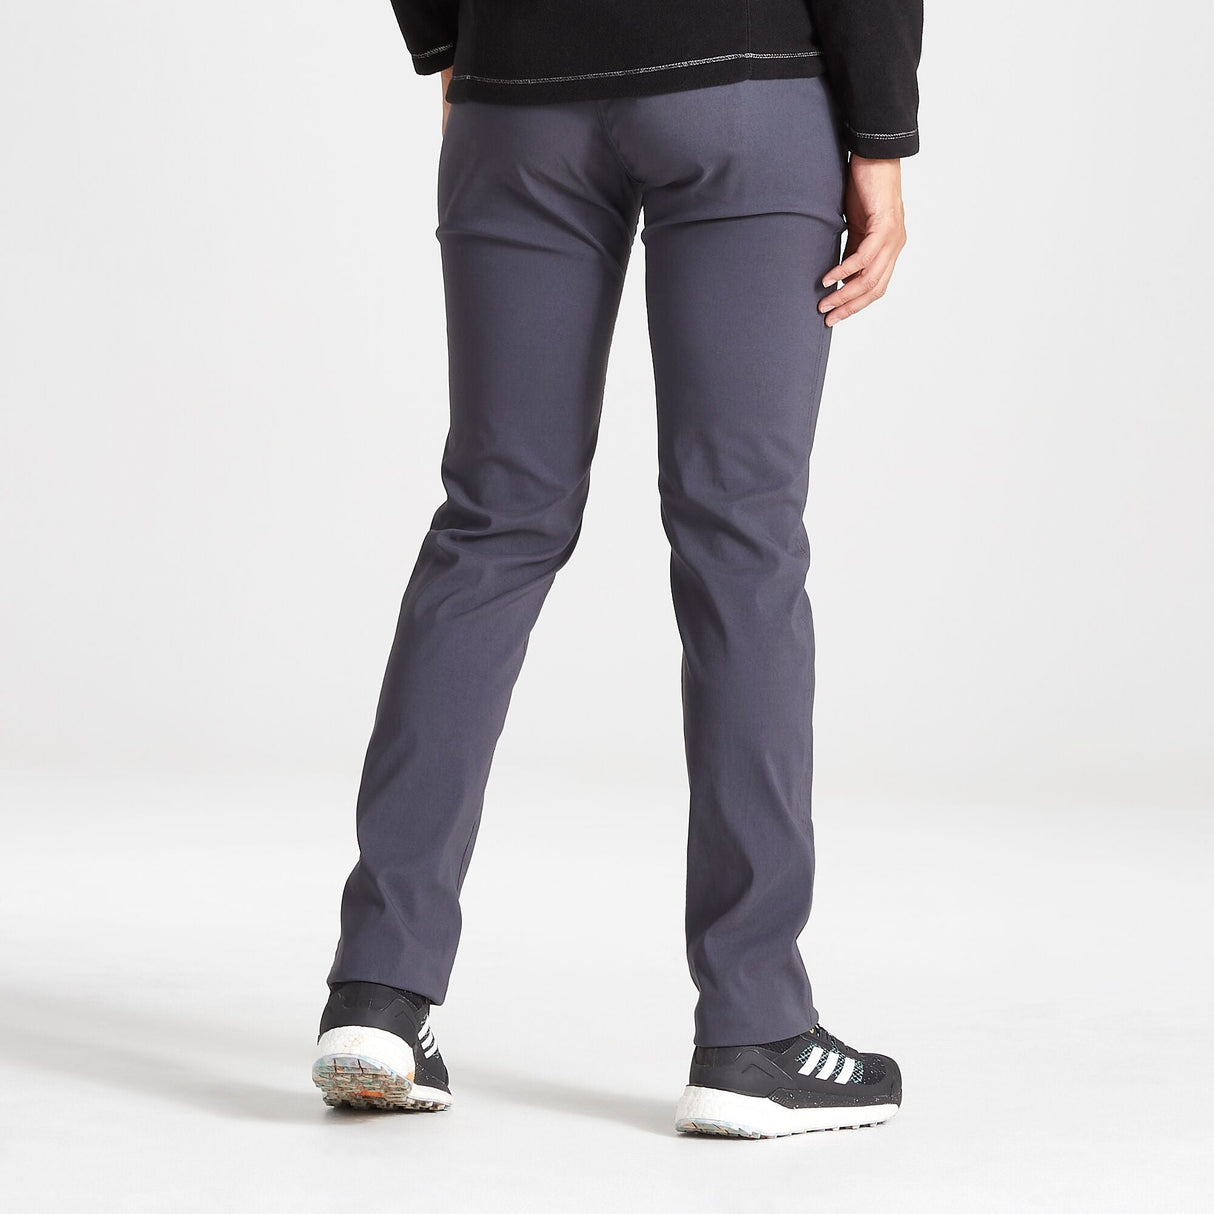 Craghoppers Women's CWJ1280 Kiwi Pro II Trousers - Long Leg - Premium clothing from Craghoppers - Just $39.99! Shop now at Warwickshire Clothing